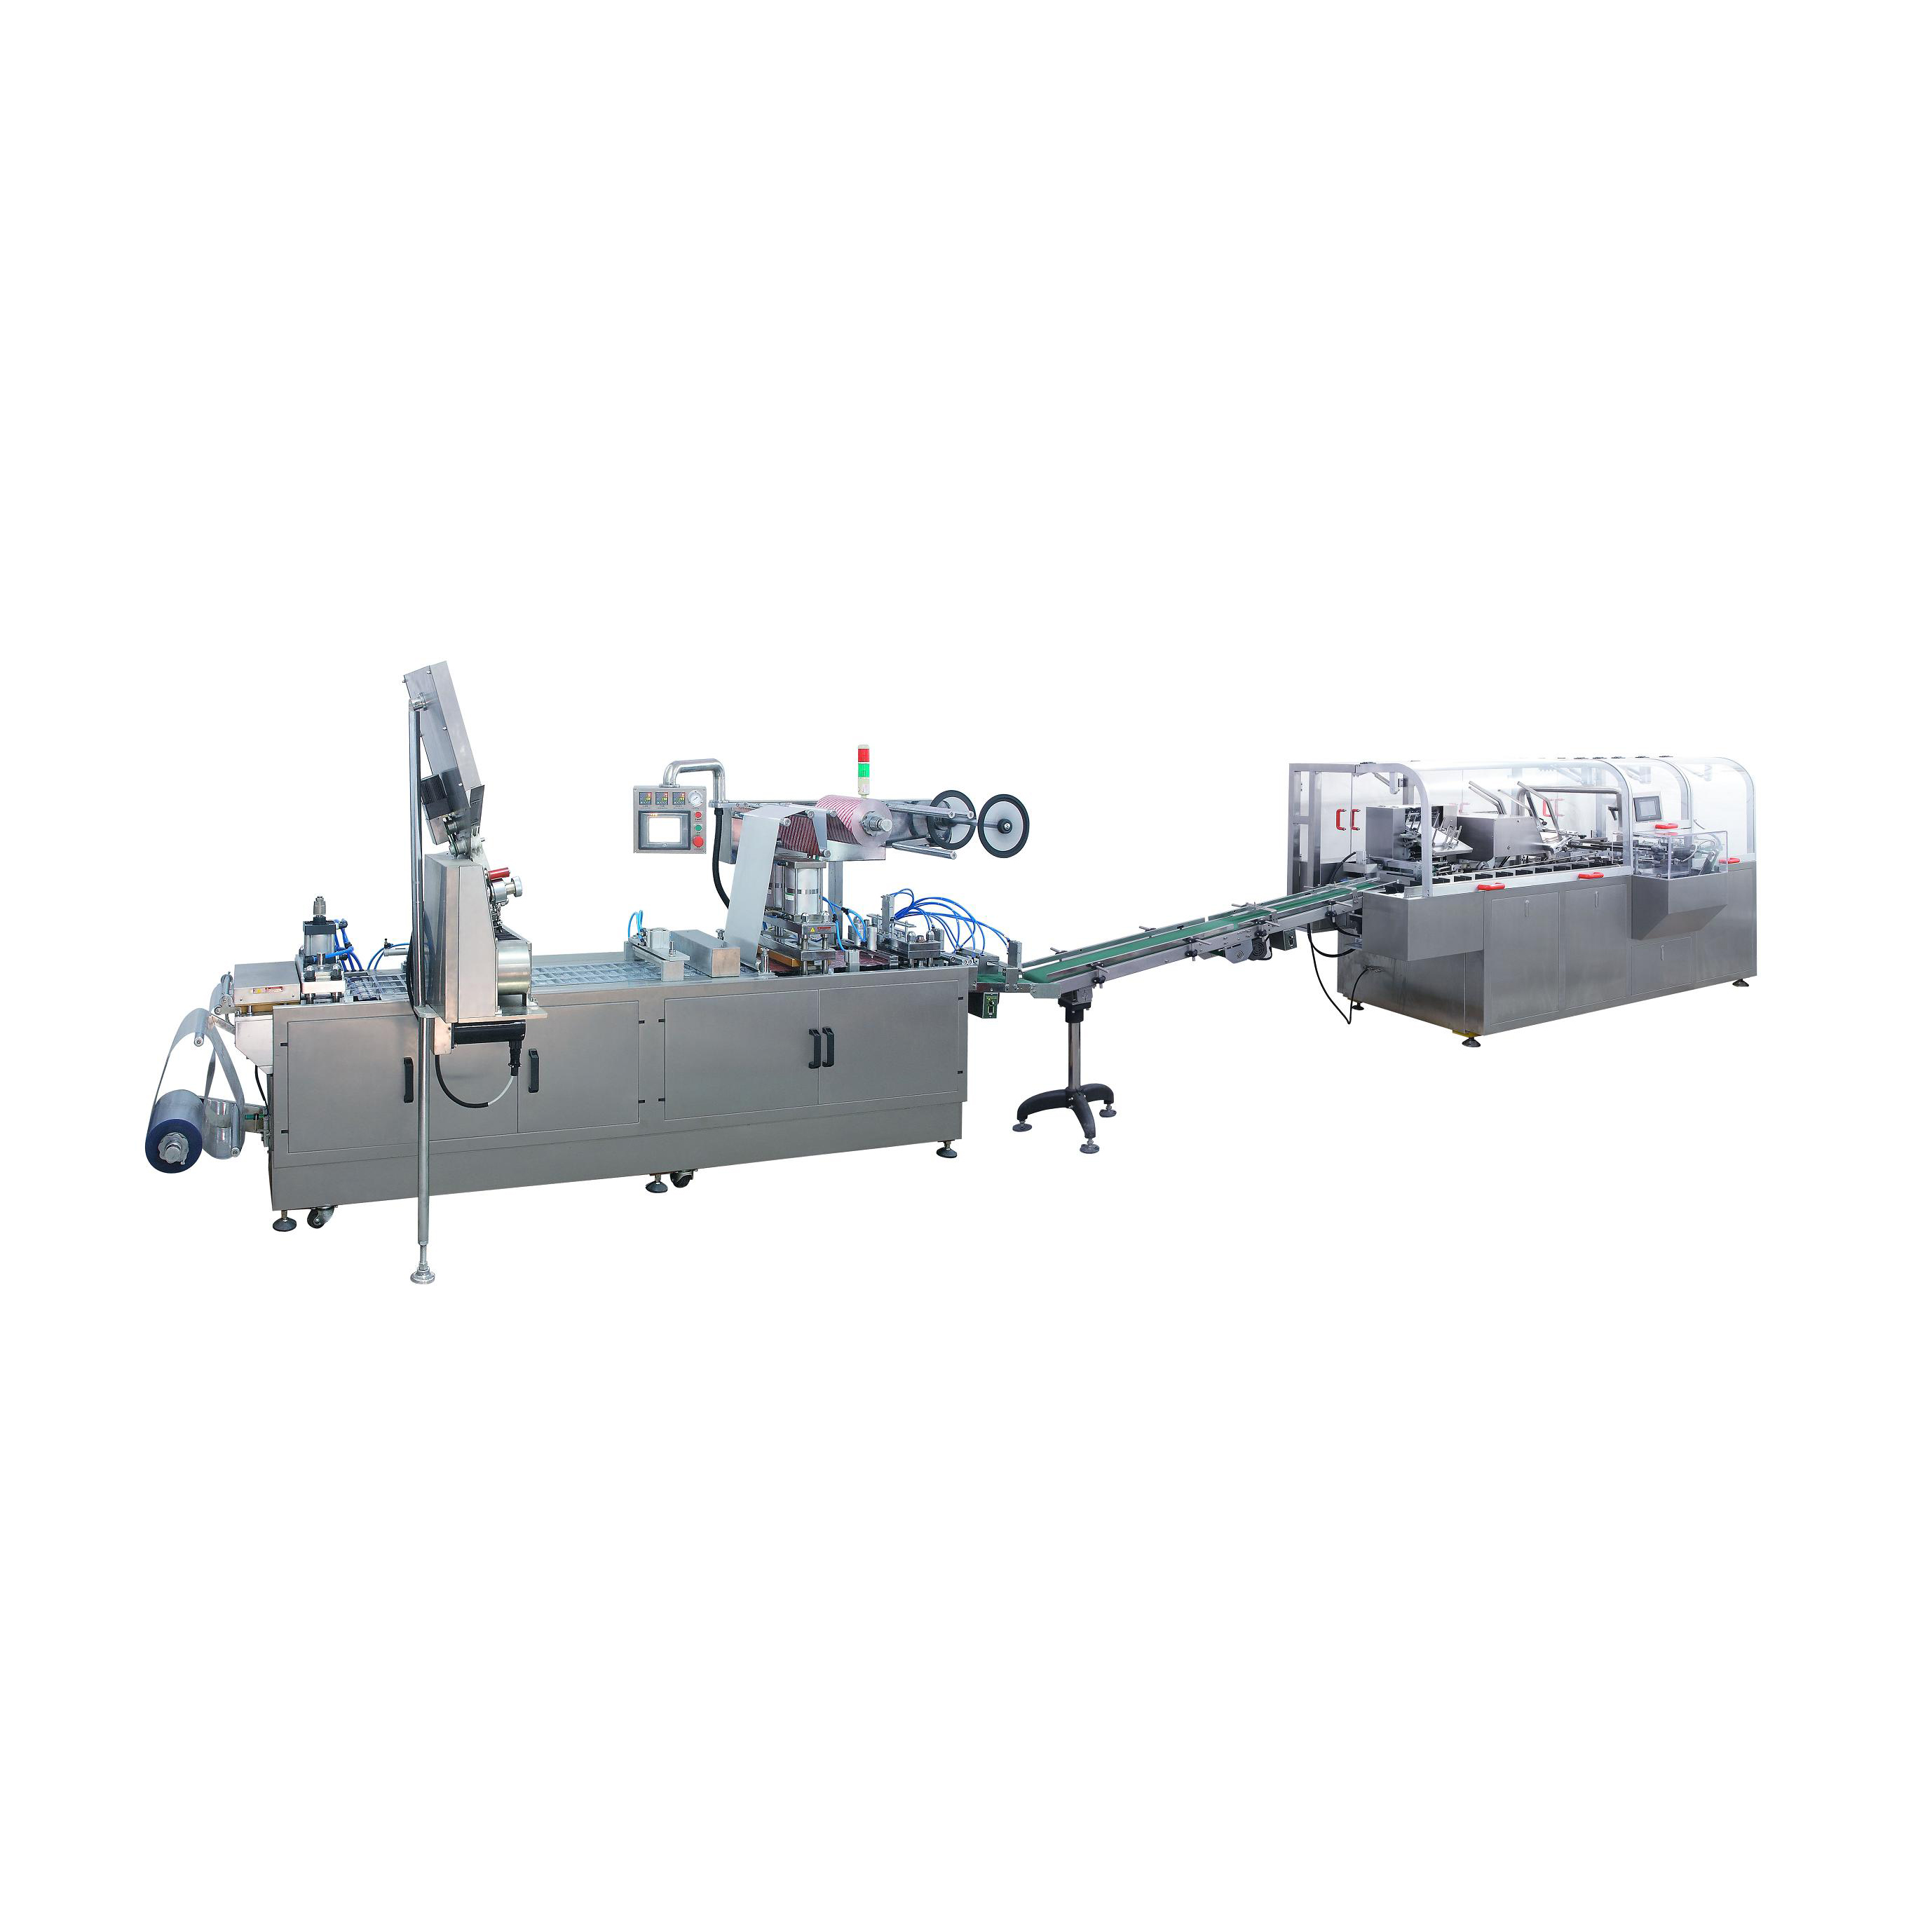 Ampoule/vial automatic tray forming, feeding in tray and cartoning production line